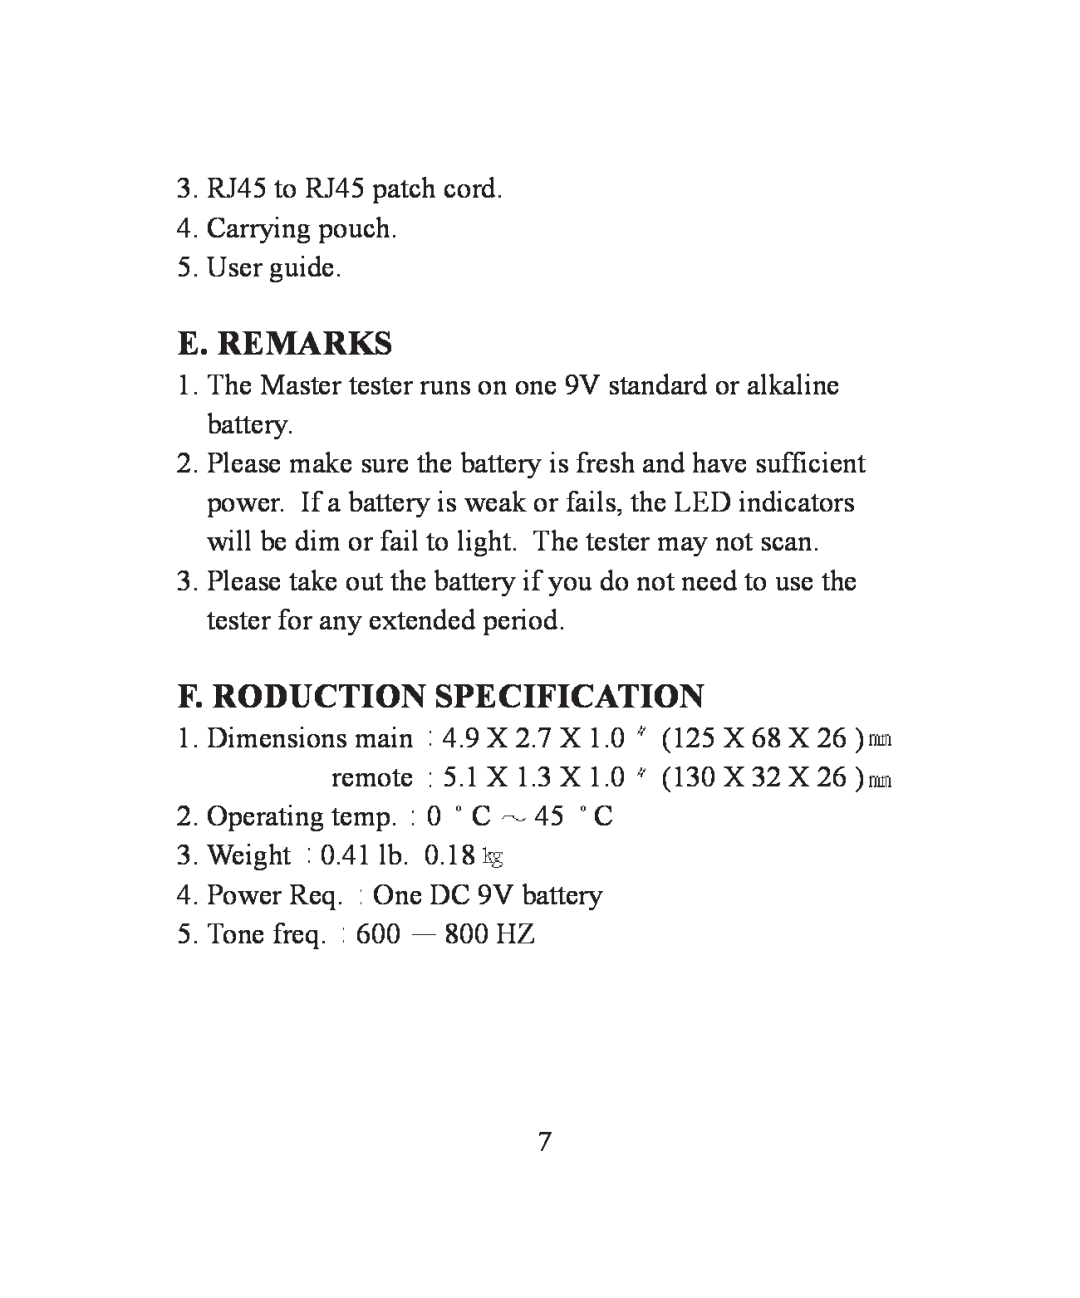 TRENDnet TC-NT2 instruction manual E. Remarks, F. Roduction Specification 